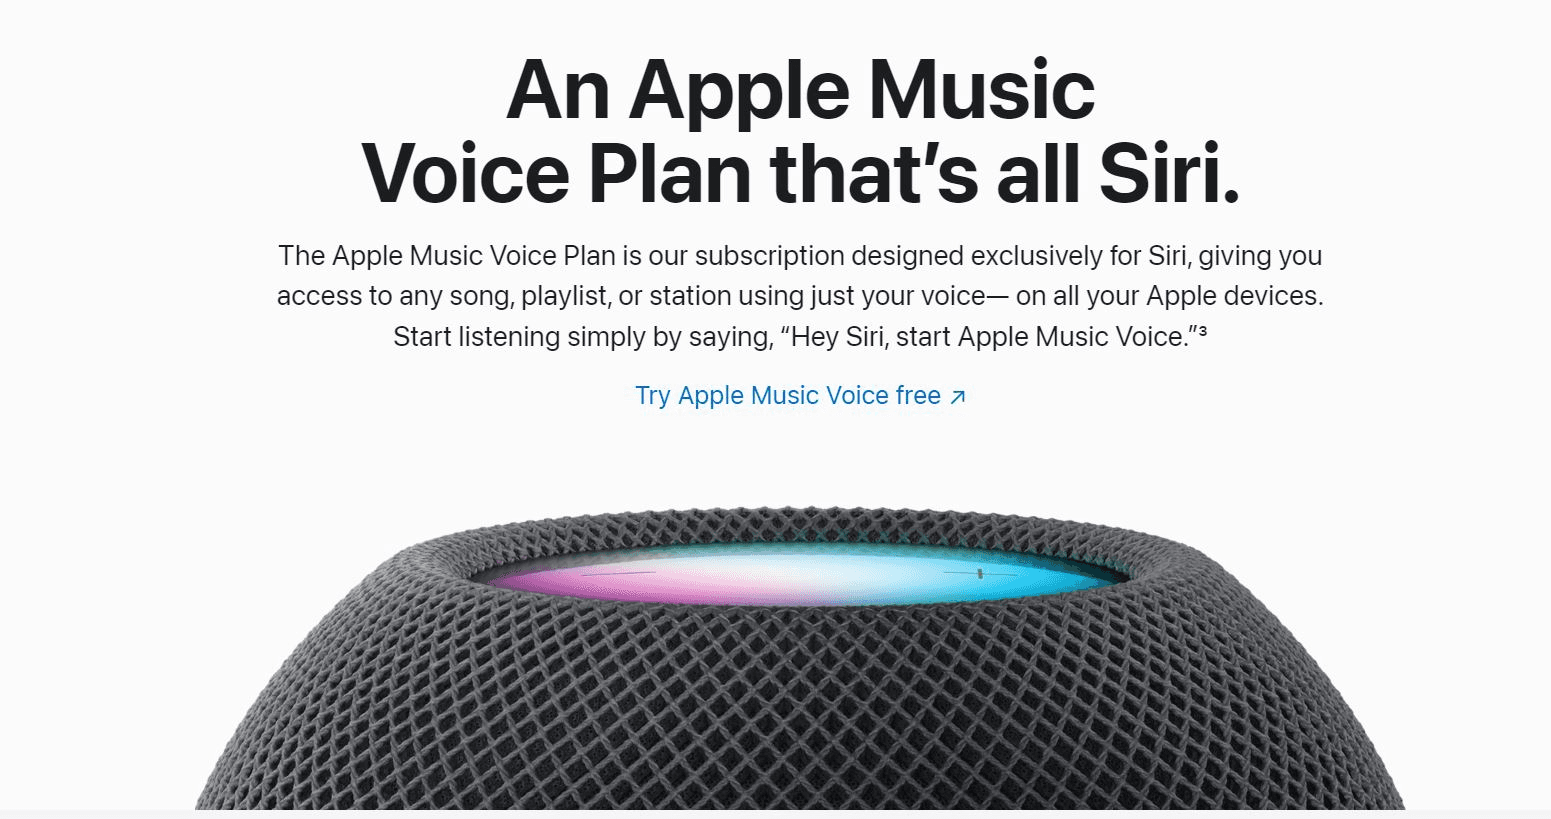 The Apple Music voice plan connects you to Siri